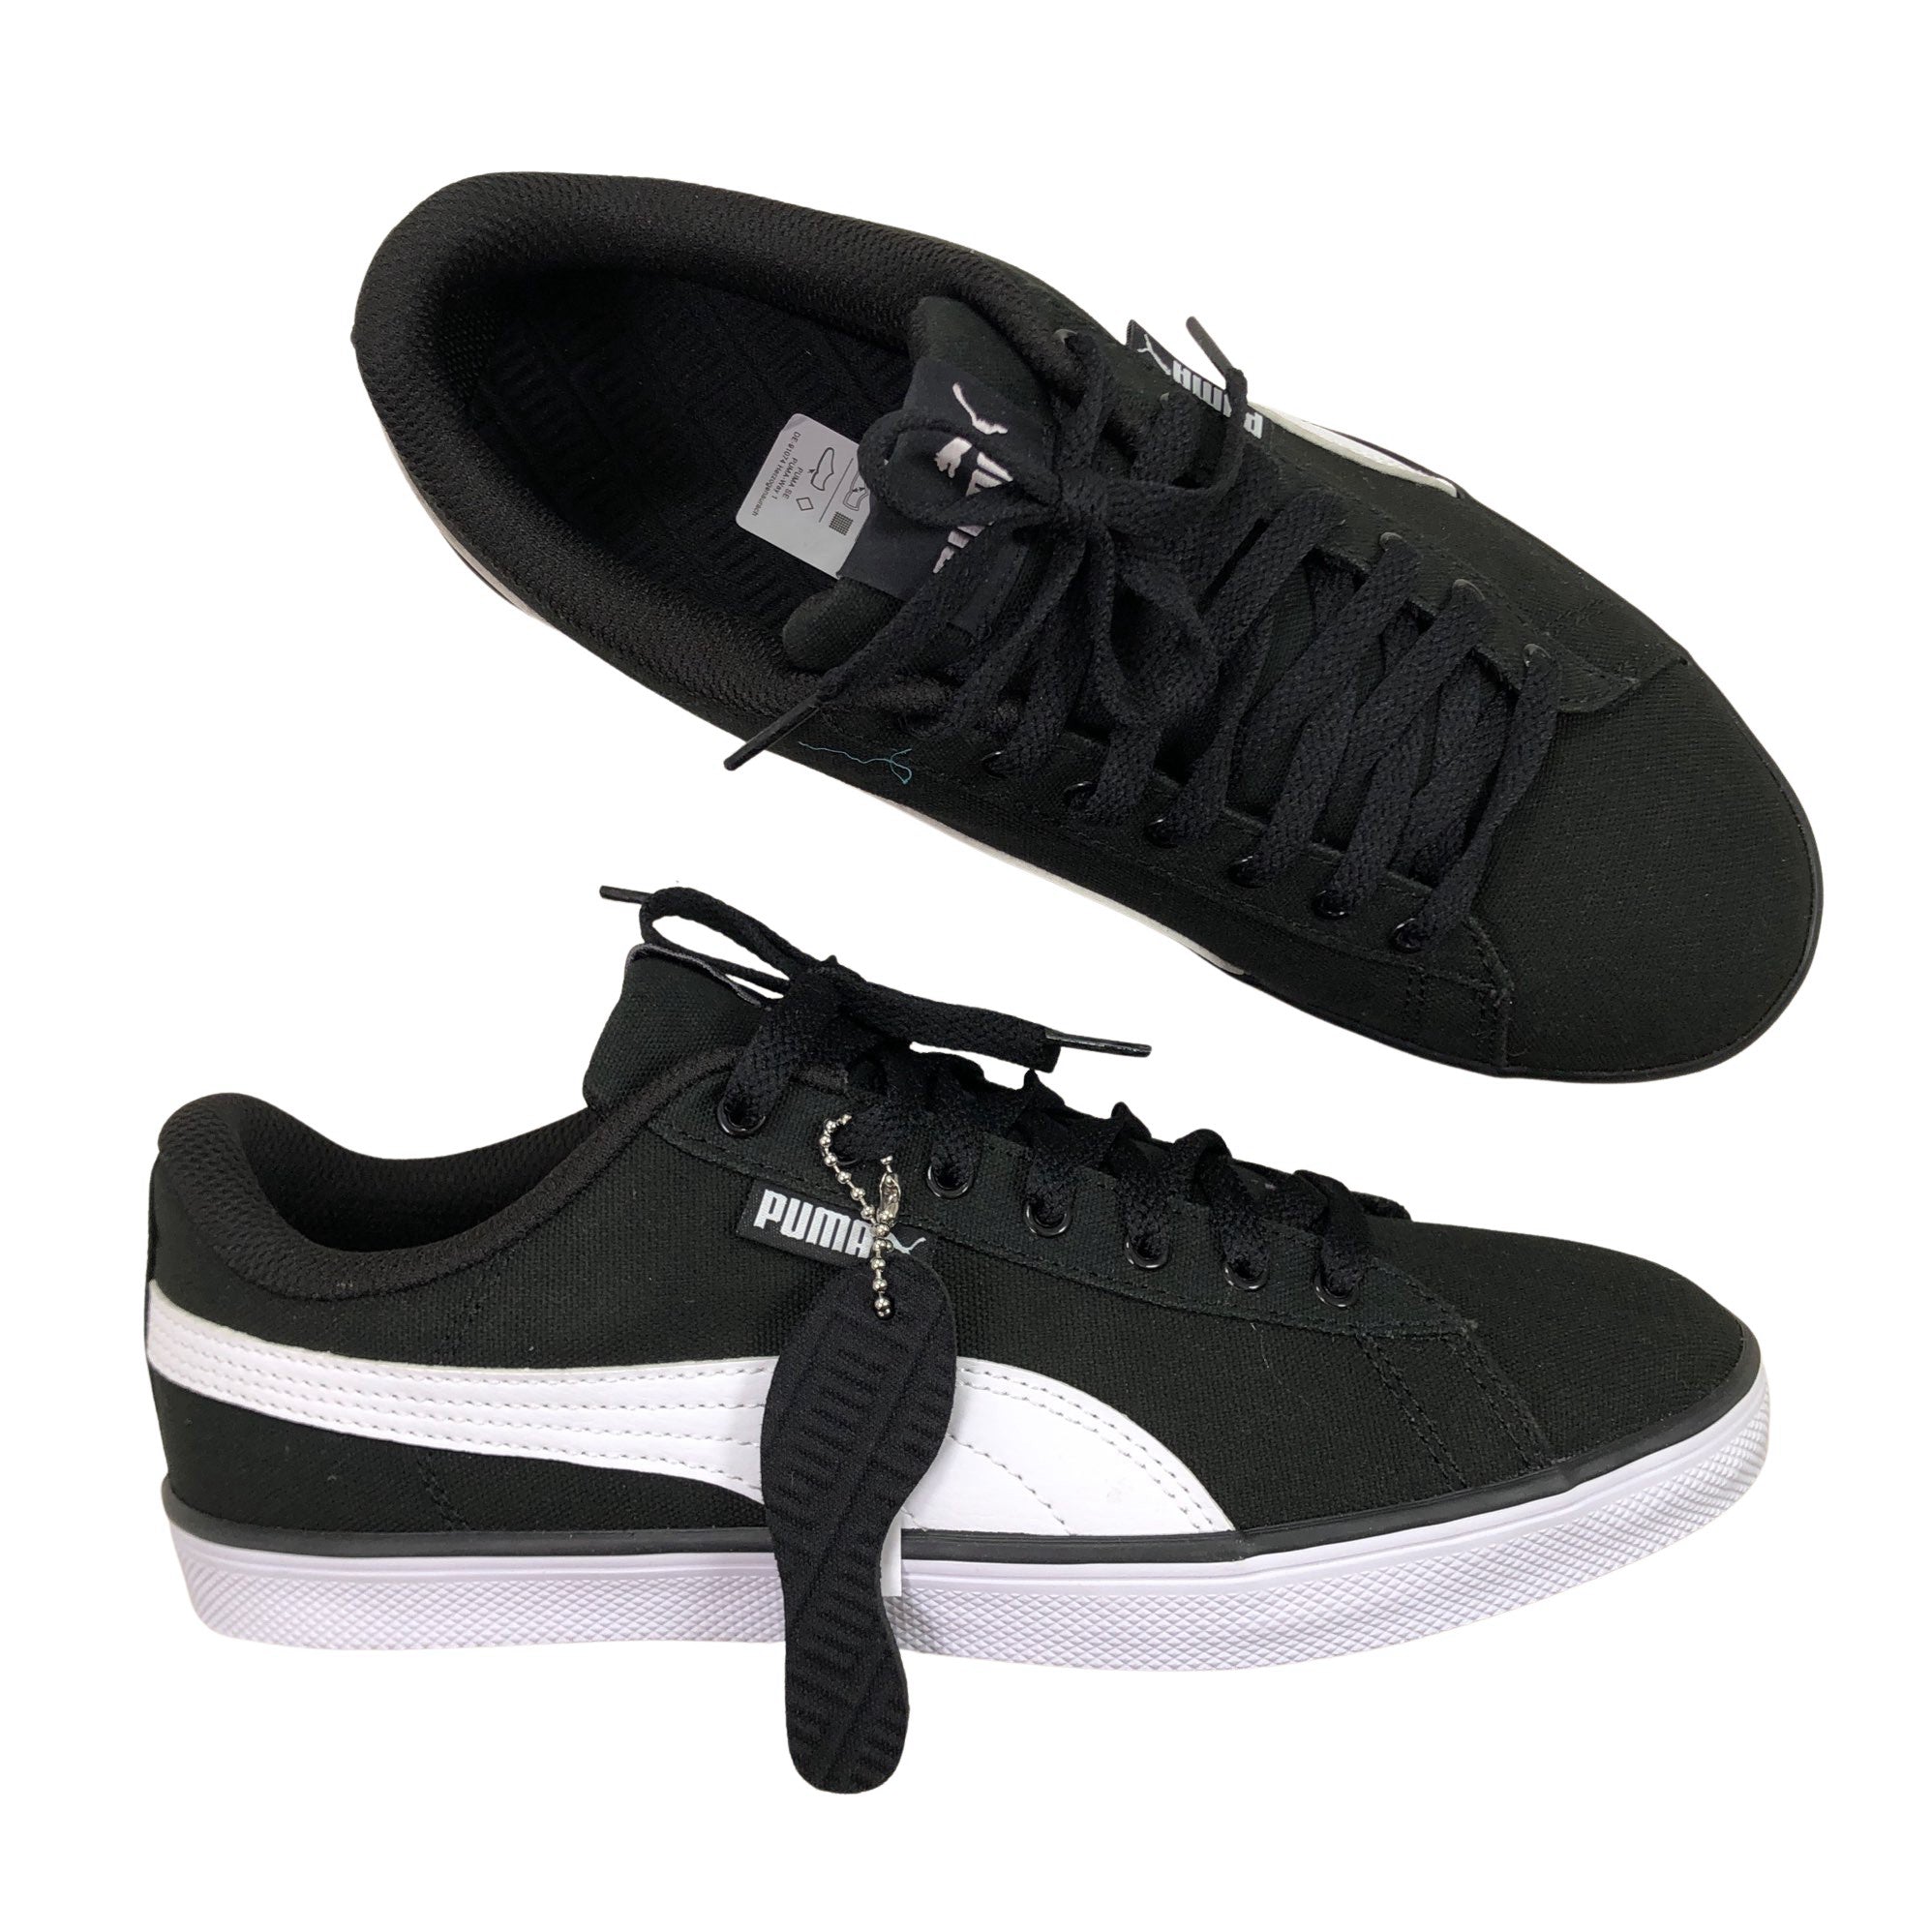 Unisex Puma Casual sneakers, size 39 (Black) | Emmy